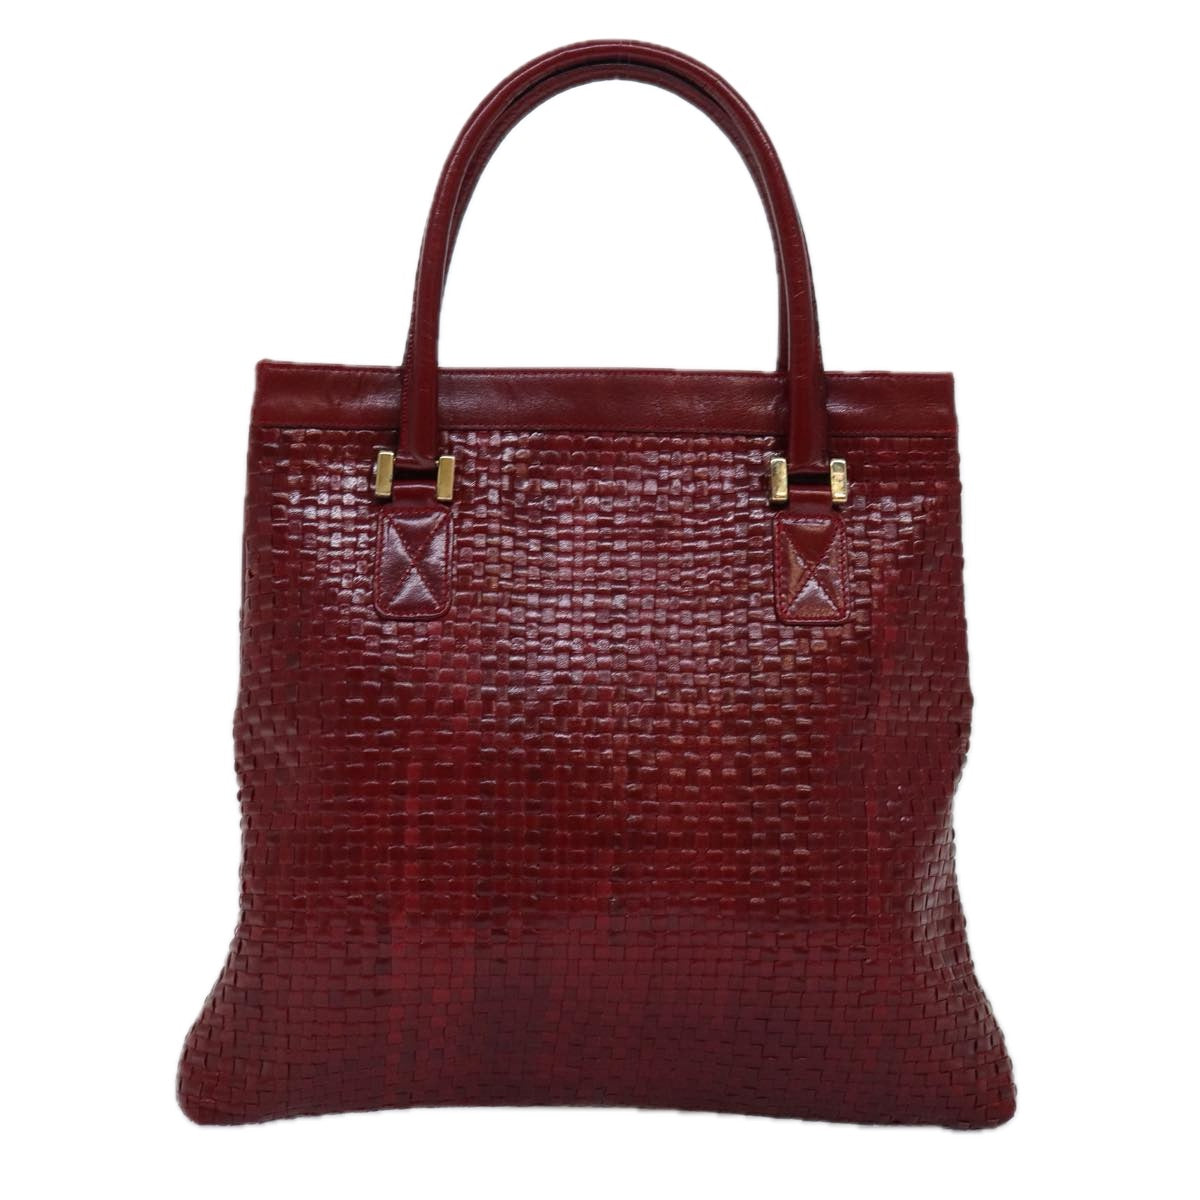 FENDI Tote Bag Leather Red Auth 74221 - 0